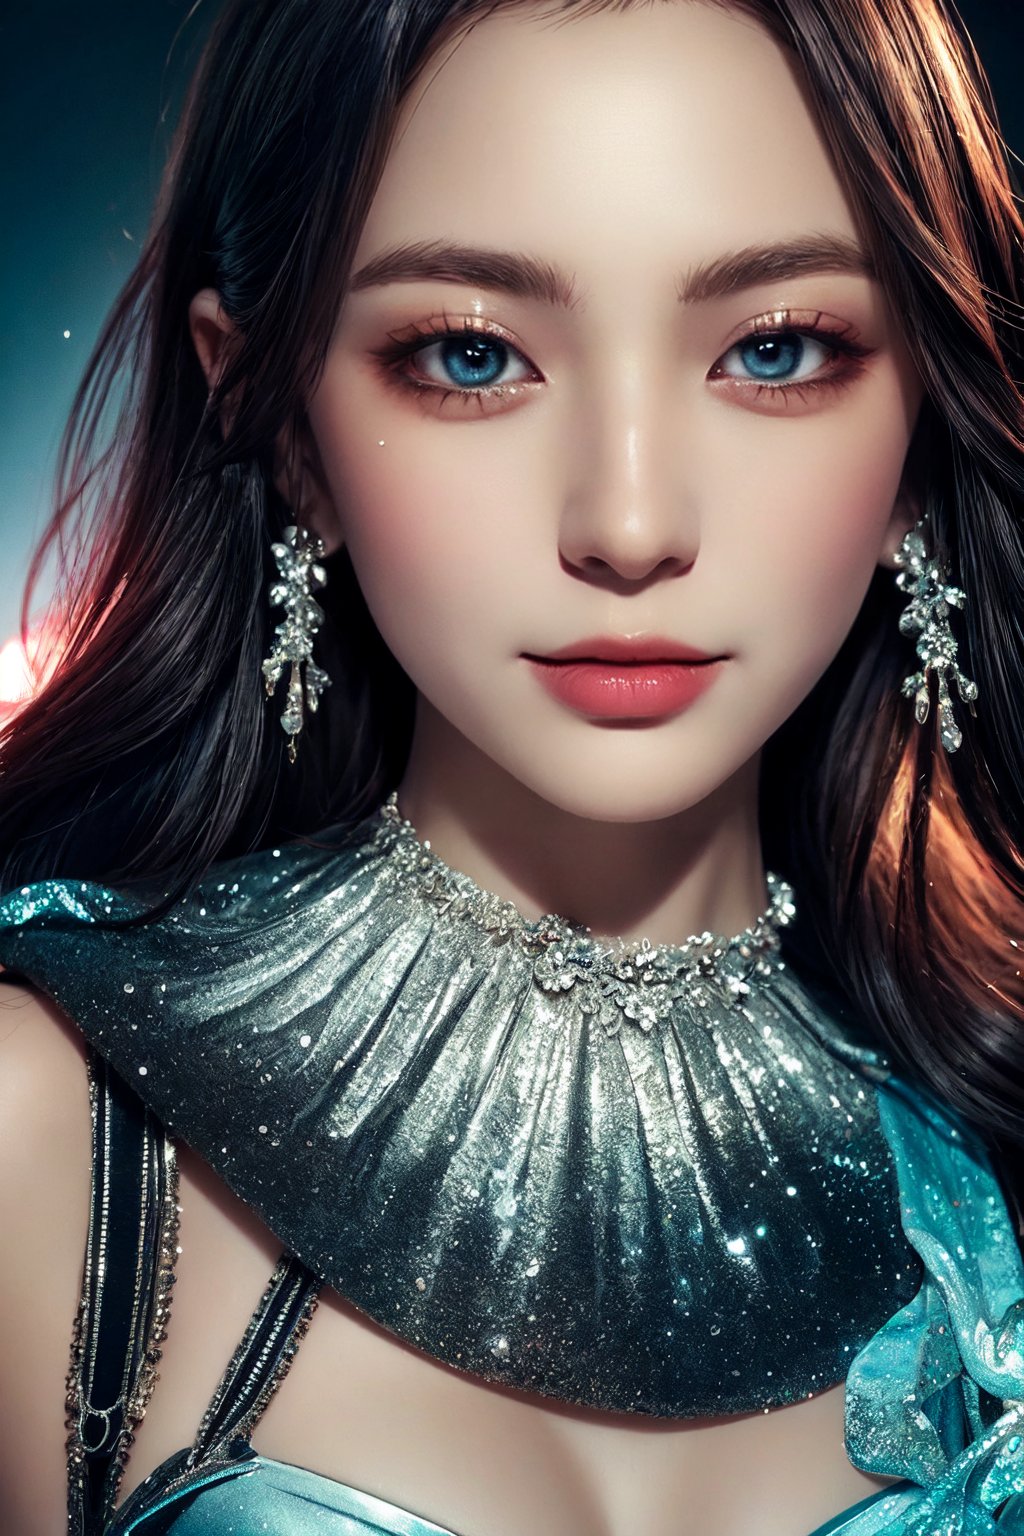 (masterpiece, high quality:1.5), 8K, HDR, 
1girl, well_defined_face, well_defined_eyes, ultra_detailed_eyes, ultra_detailed_face, by FuturEvoLab, 
ethereal lighting, immortal, elegant, porcelain skin, jet-black hair, waves, pale face, ice-blue eyes, blood-red lips, pinhole photograph, retro aesthetic, monochromatic backdrop, mysterious, enigmatic, timeless allure, the siren of the night, secrets, longing, hidden dangers, captivating, nostalgia, timeless fascination, smile, ,Exquisite face